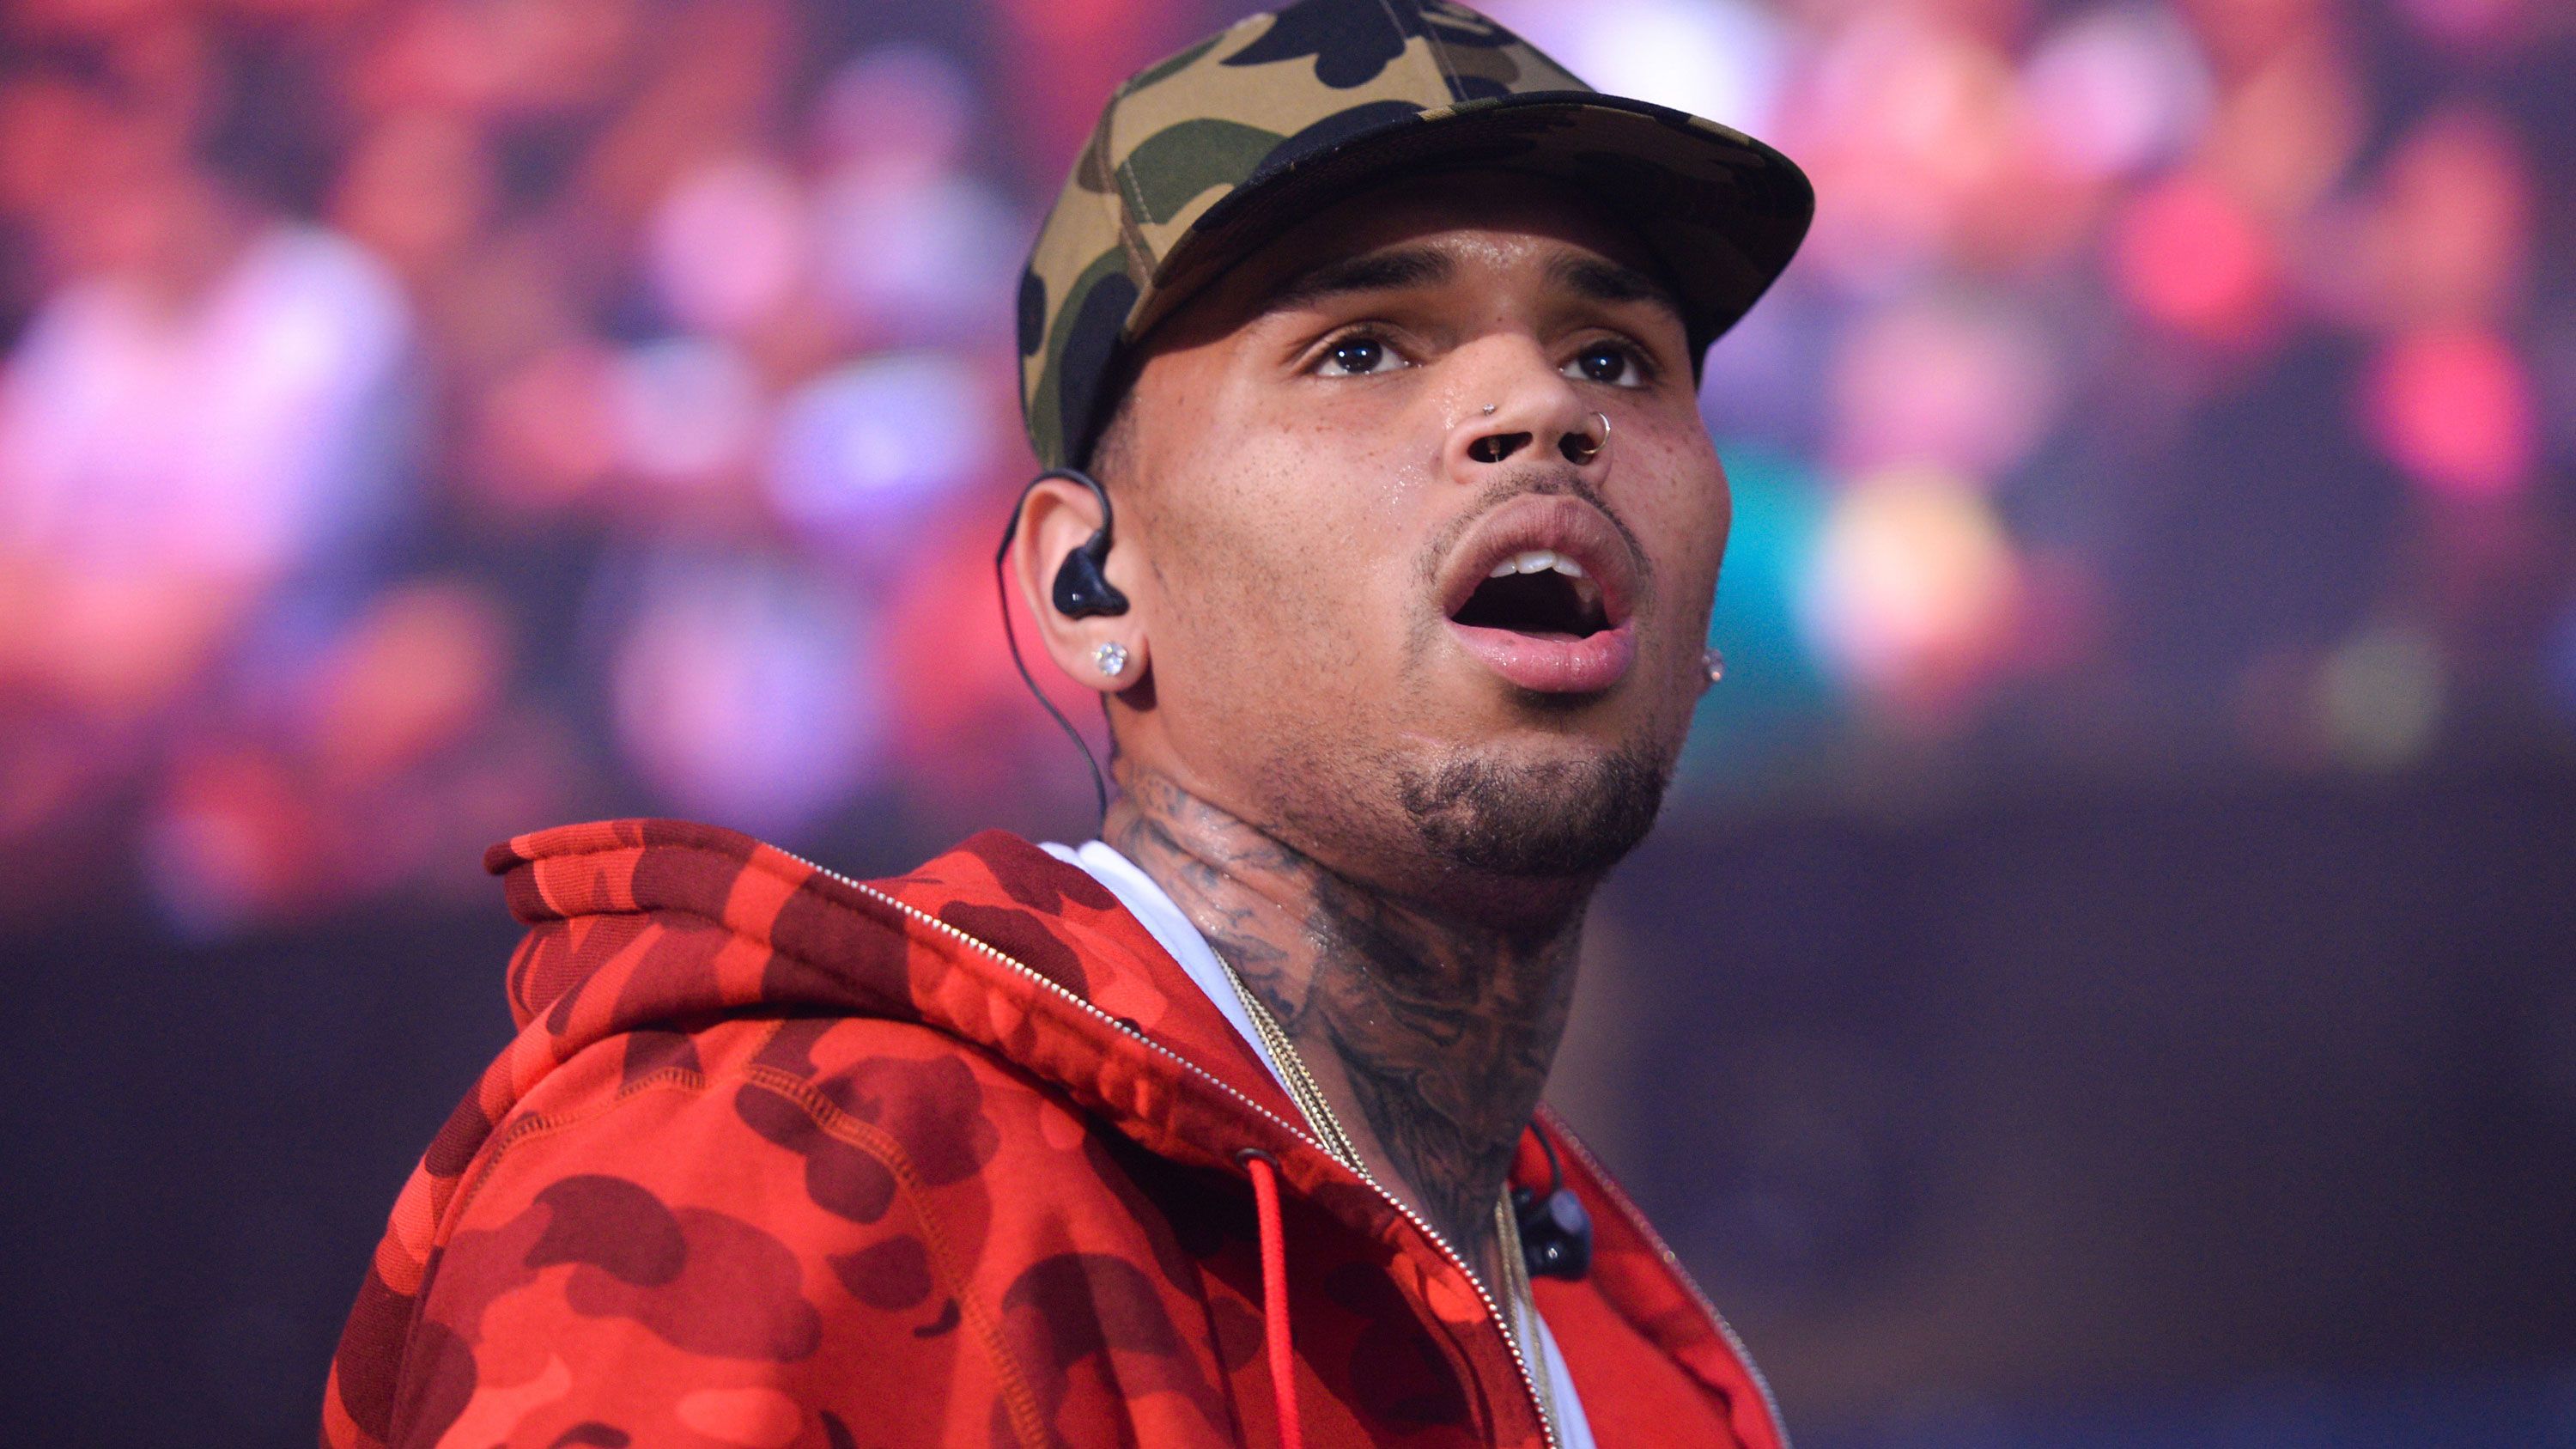 Chris Brown goes to jail early, out after 45 minutes, quits music